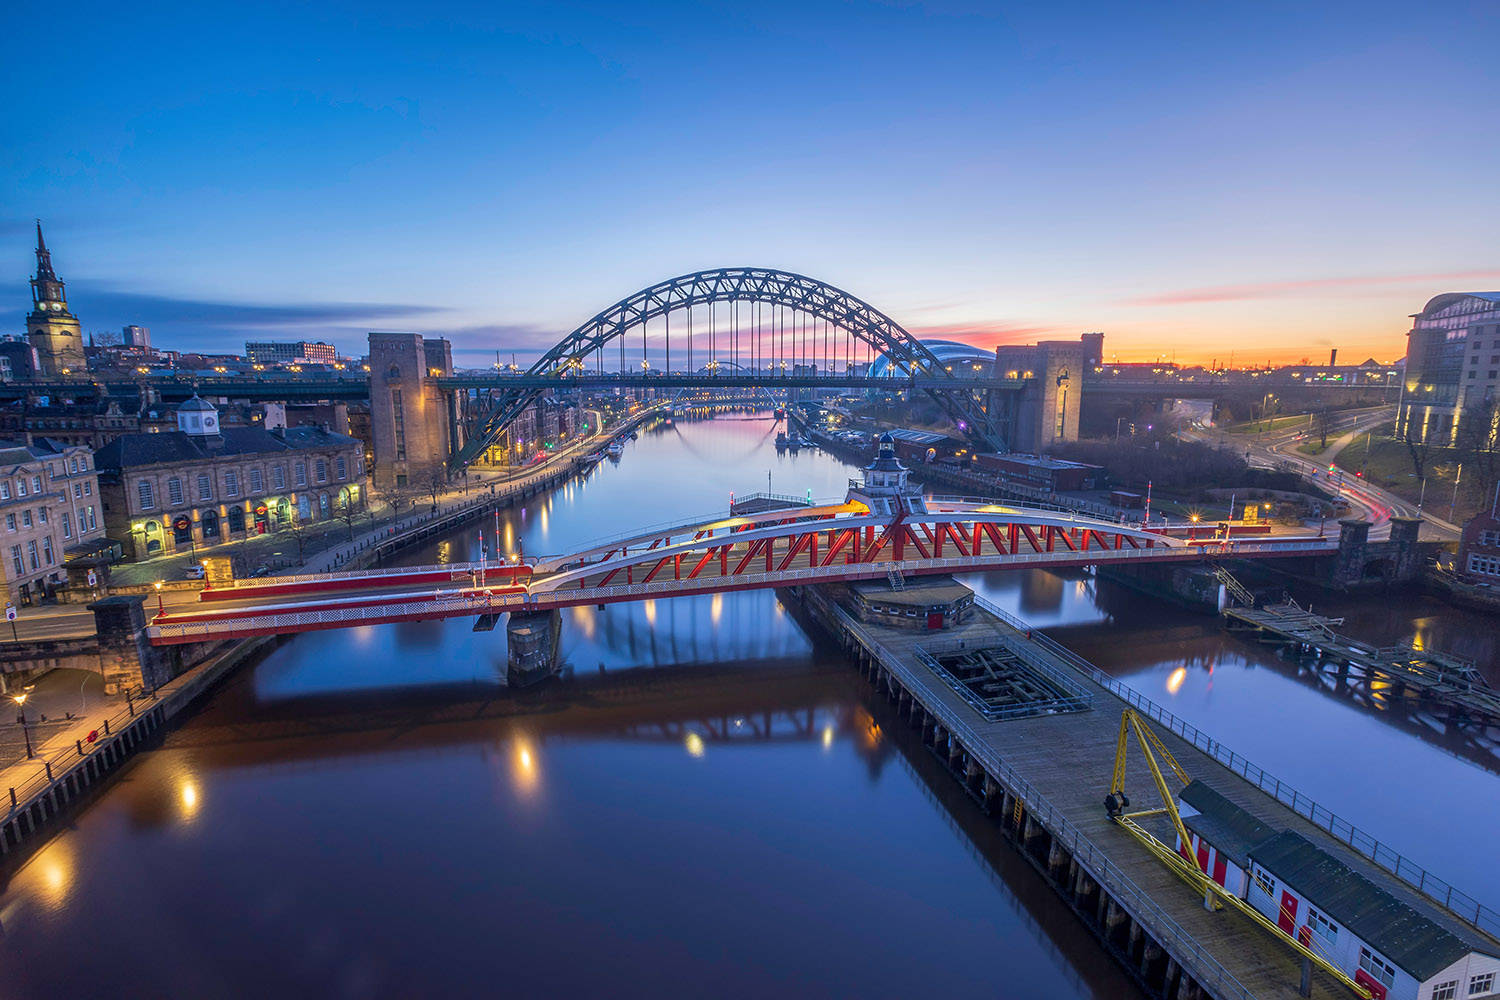 A picture of a bridge over a river in Newcastle. The city is on both sides of the bridge and the sun is just coming up in the horizon.